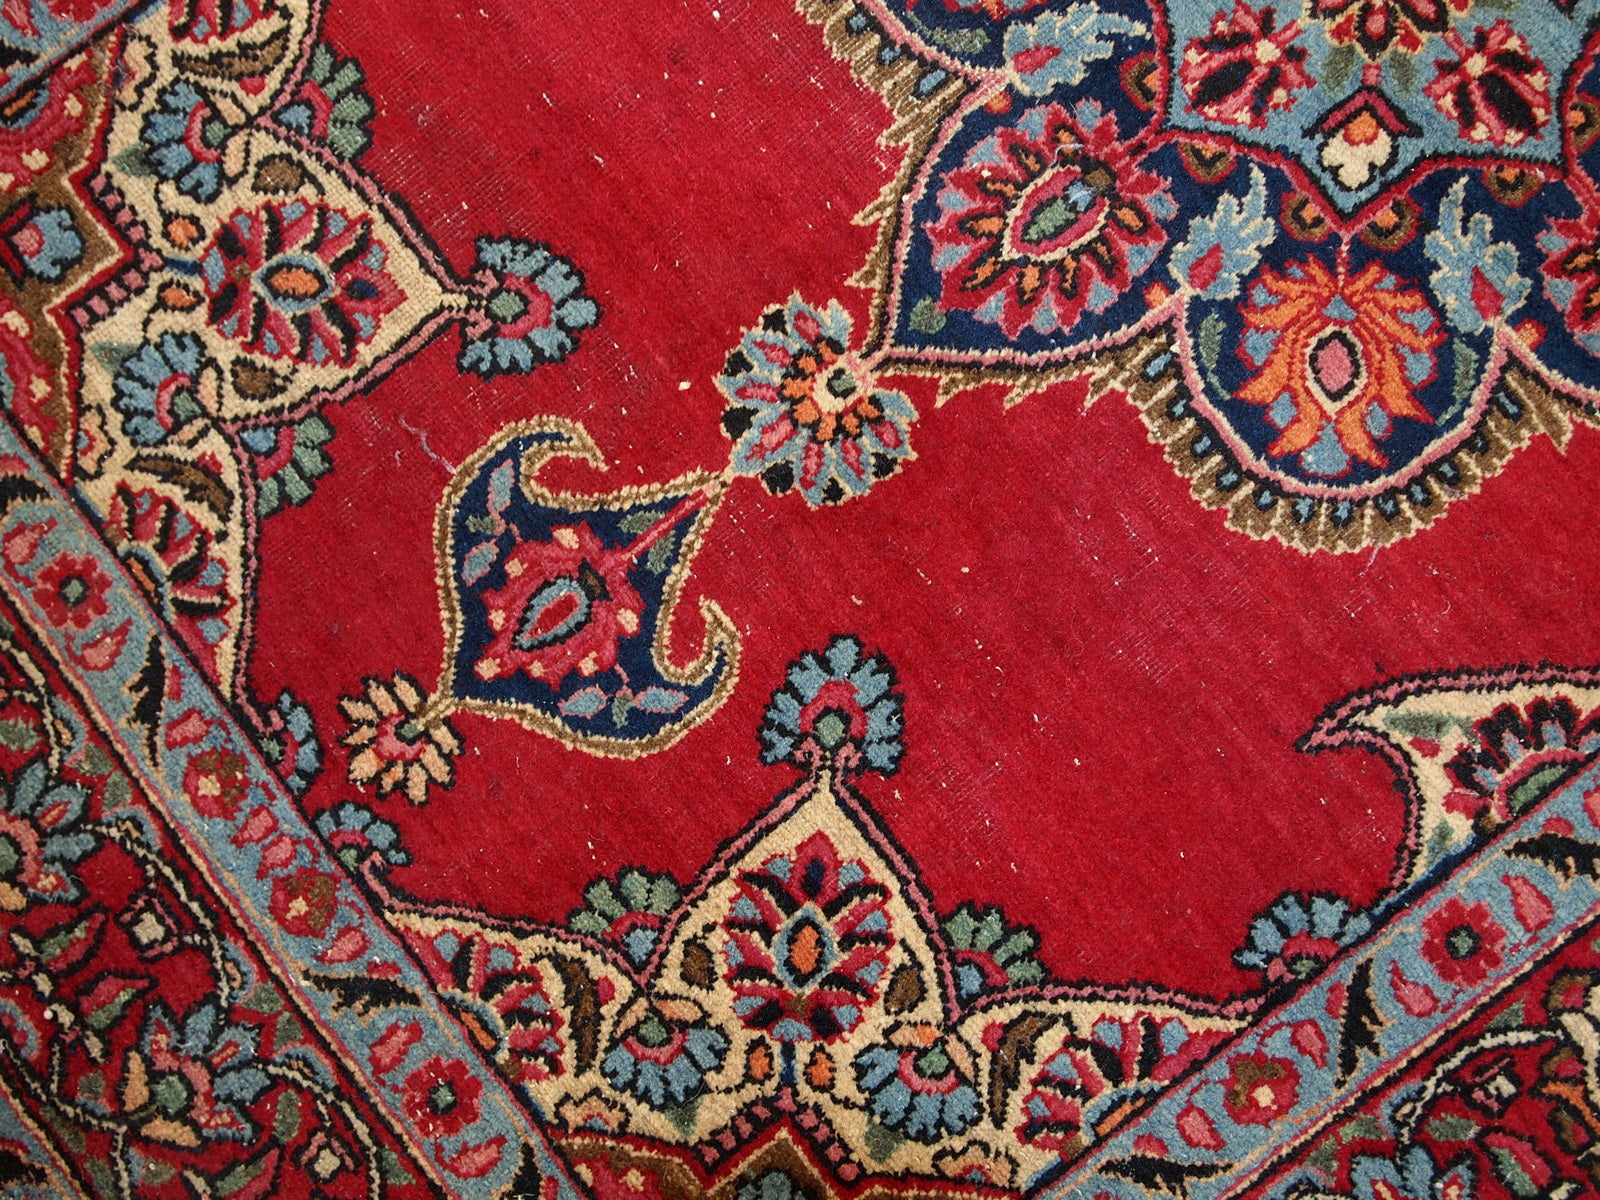 Vintage Persian Kazvin rug in bright red color. The rug is from the end of 20th century. It is in original condition, has some low pile.